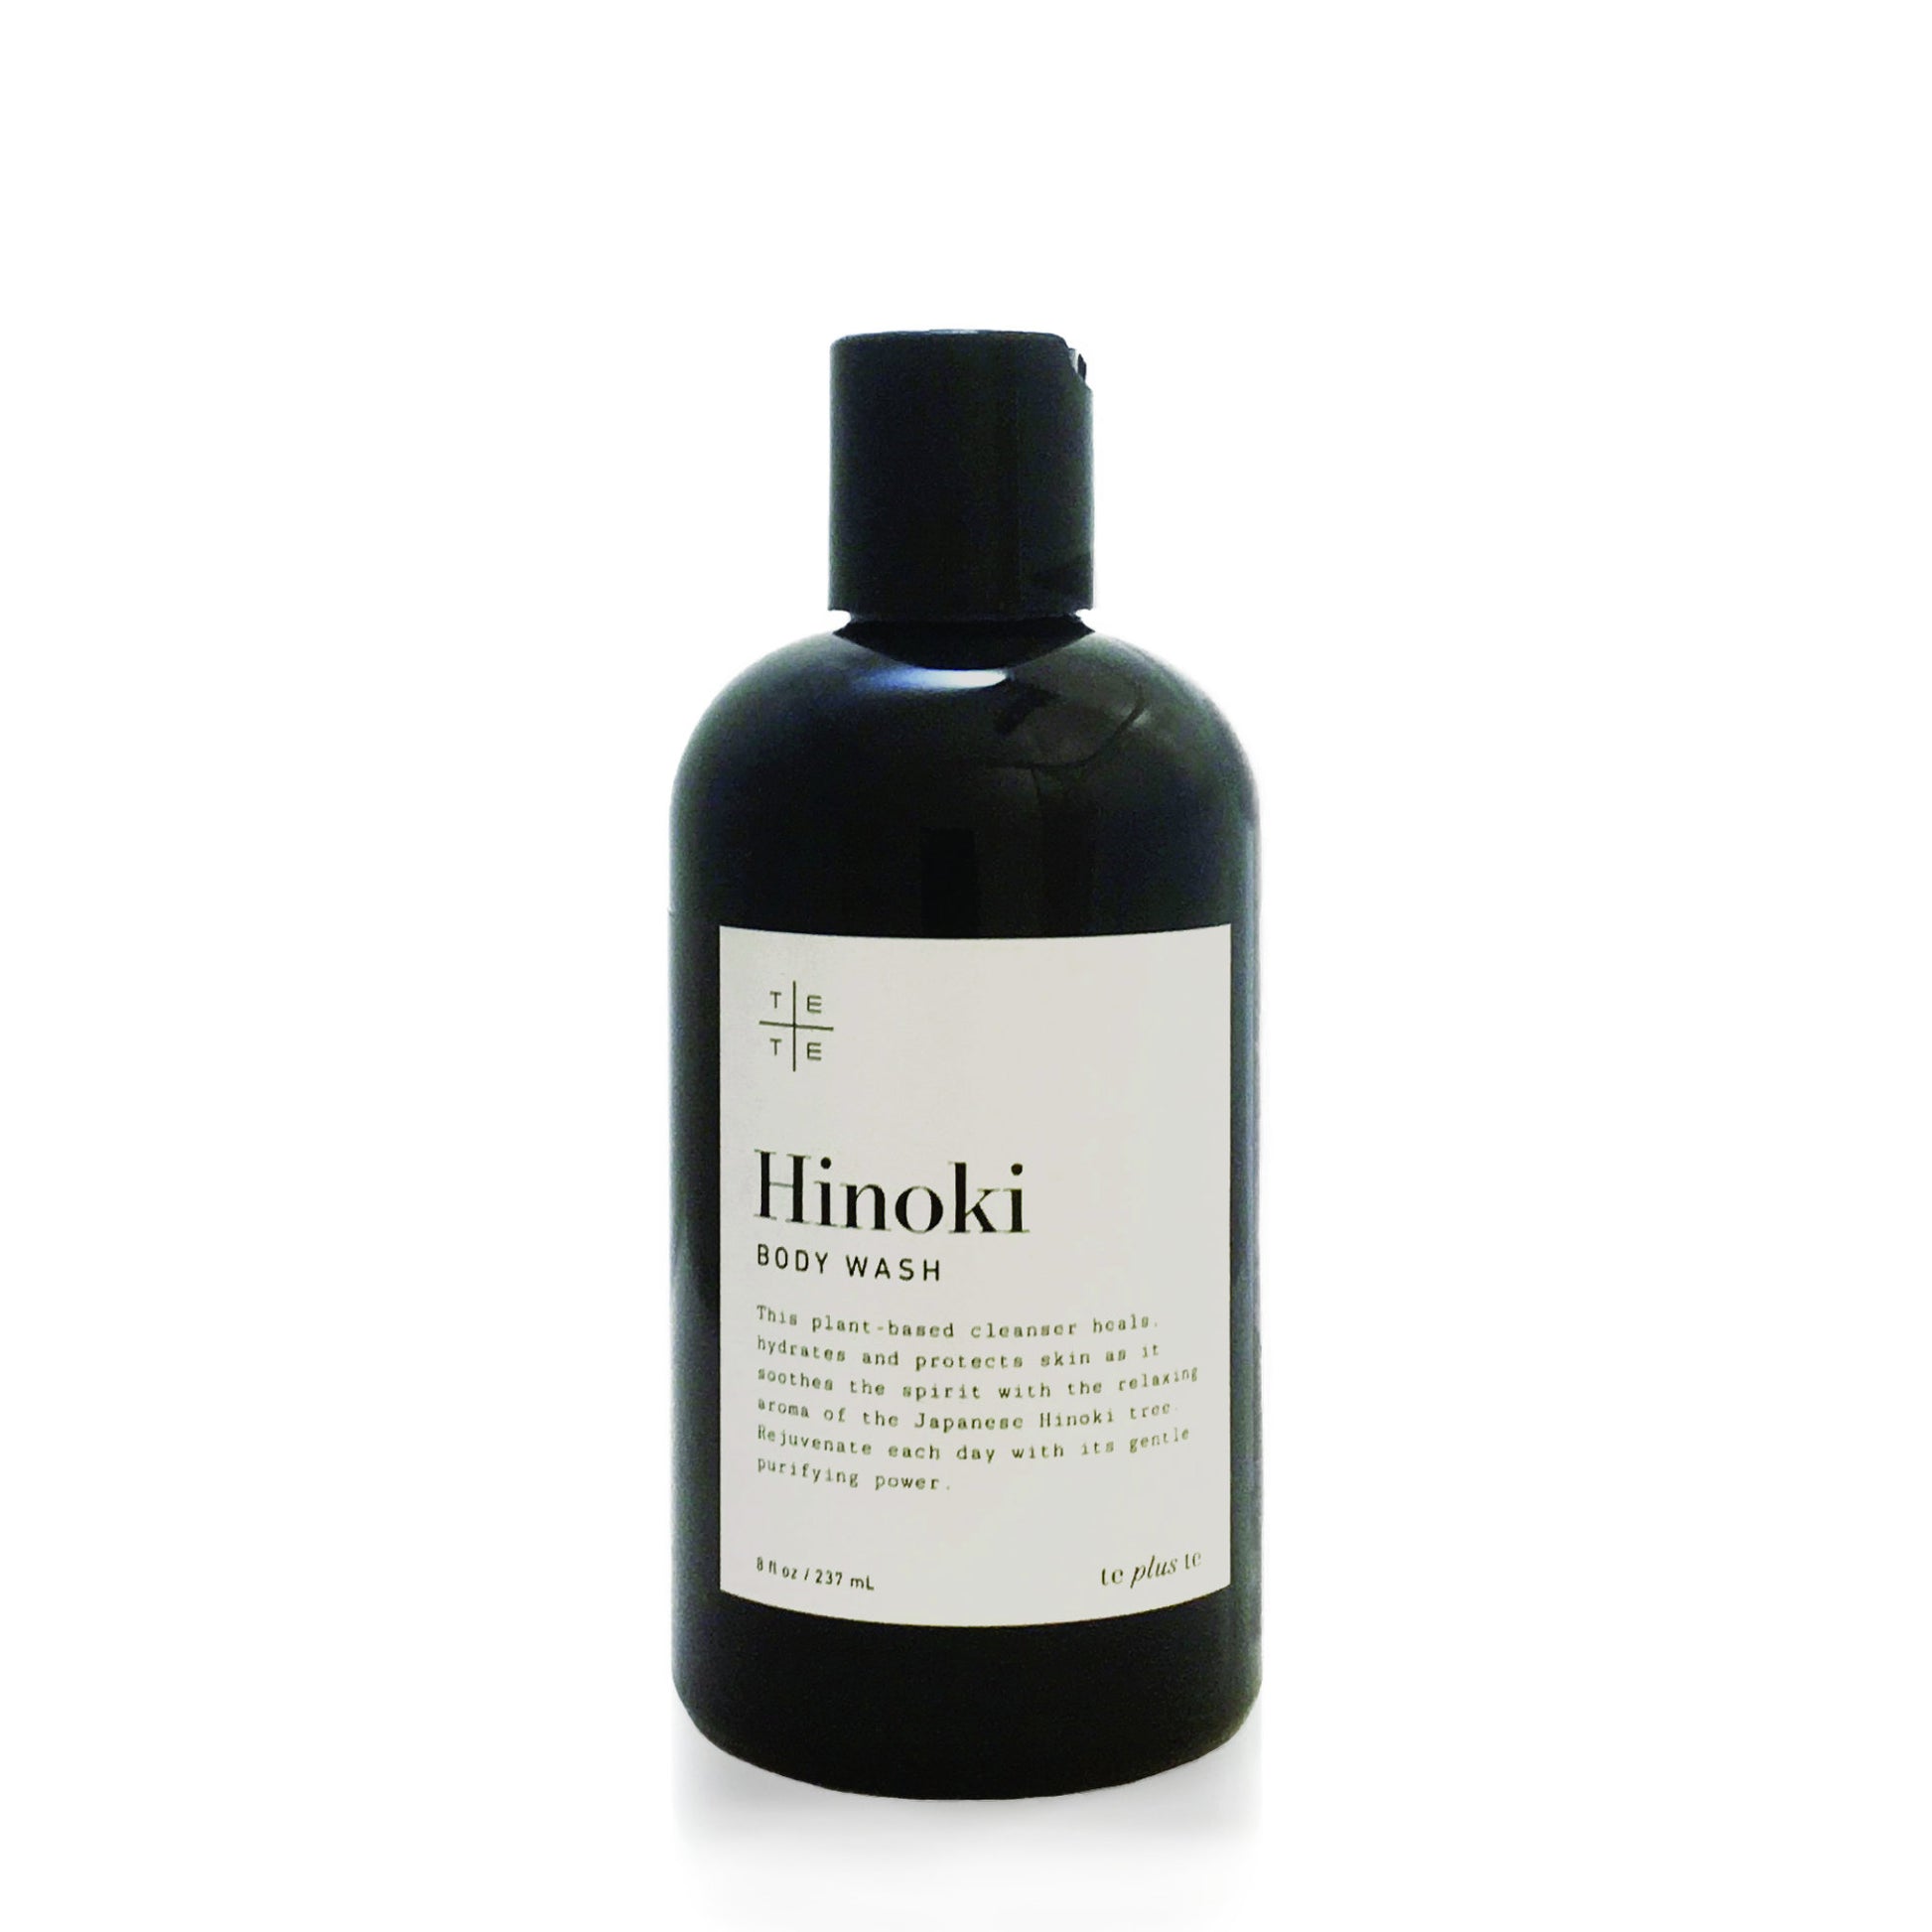 te plus te_Hinoki Body Wash 8 oz, organic plant-based cleanser heals, hydrates and protects skin as it soothes the spirit with the relaxing aroma of the Japanese hinoki tree.